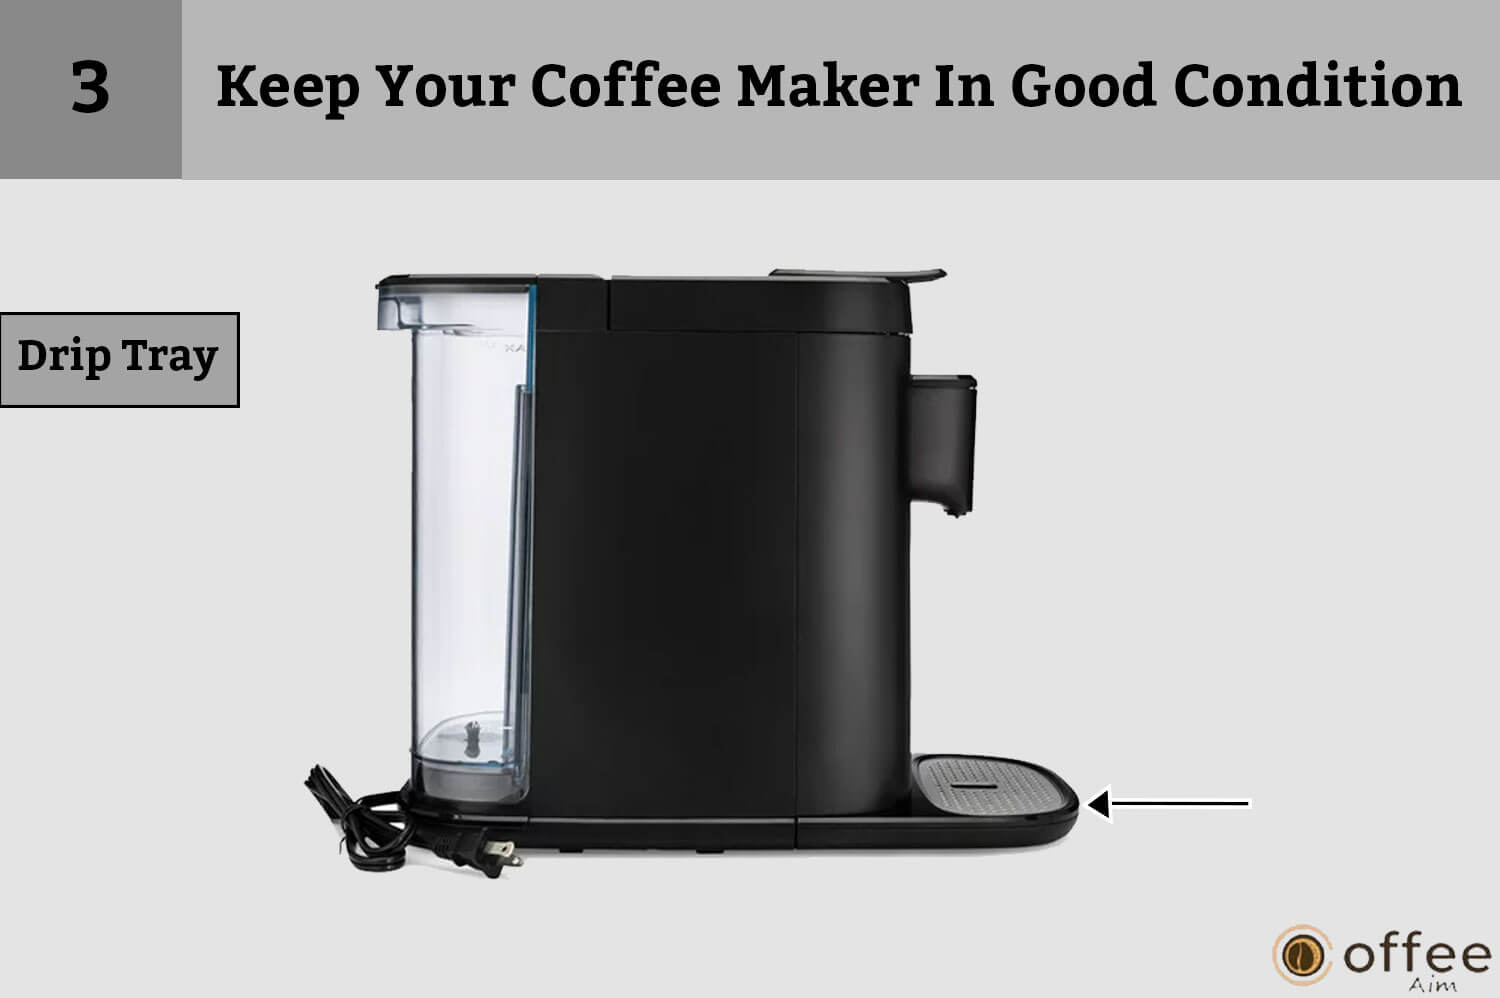 
This image showcases the "Drip Tray" as part of the guide on "How to Connect Nespresso Vertuo Creatista Machine" in our article about keeping your coffee maker in good condition.